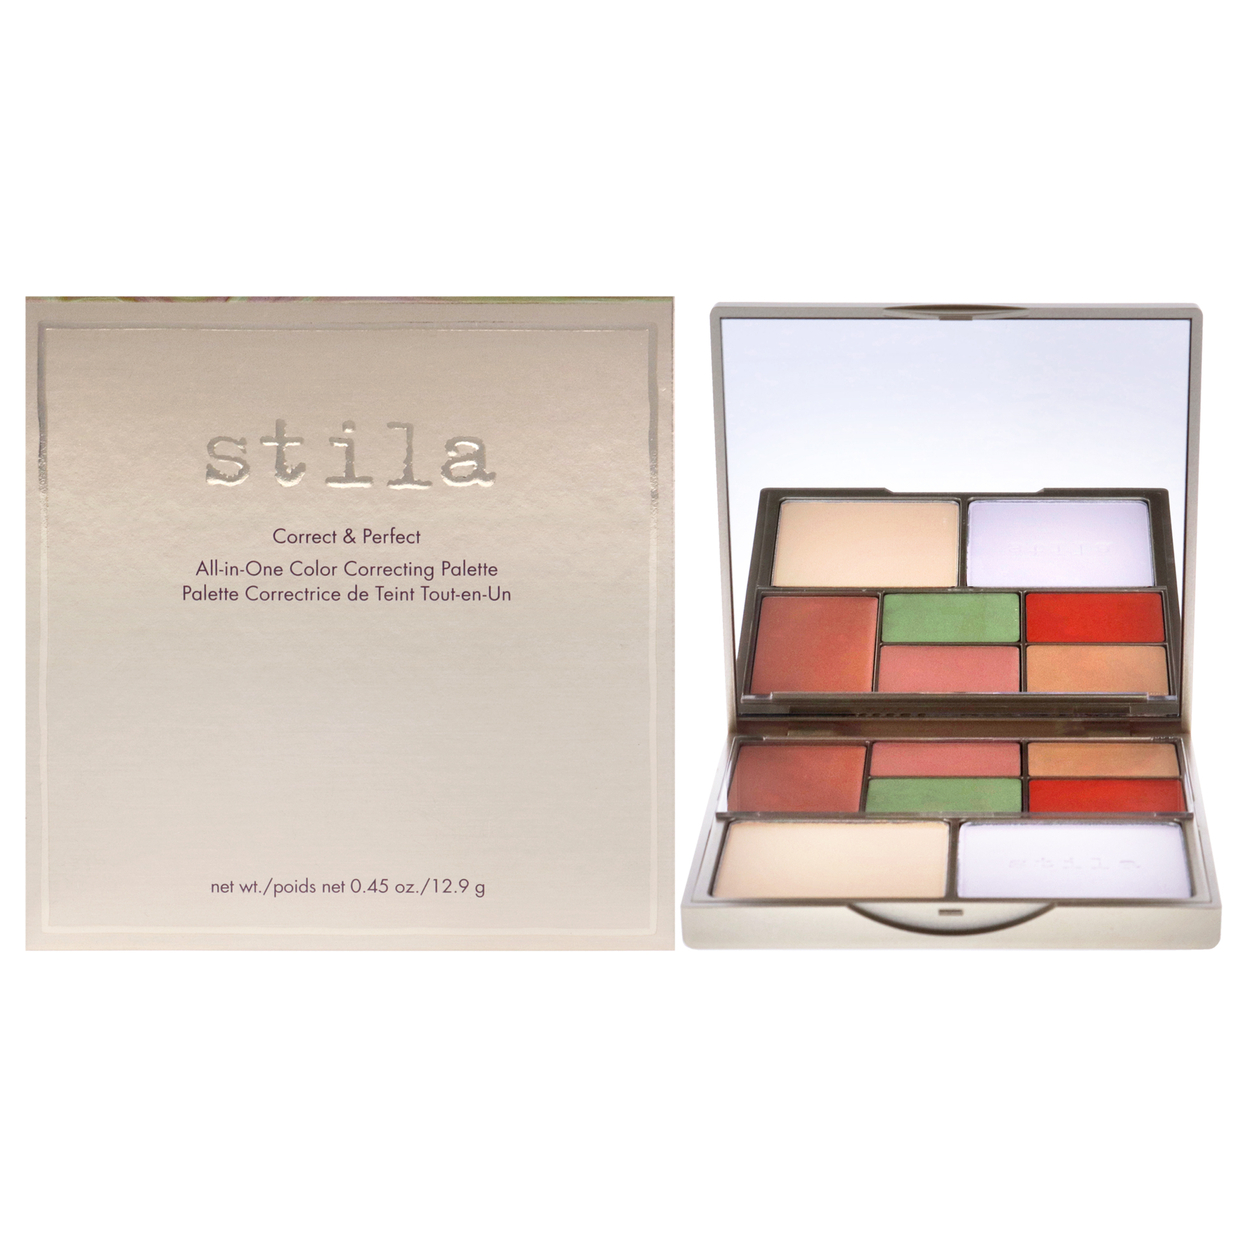 Stila Correct And Perfect All-In-One Color Correcting Palette Corrector 0.45 Oz